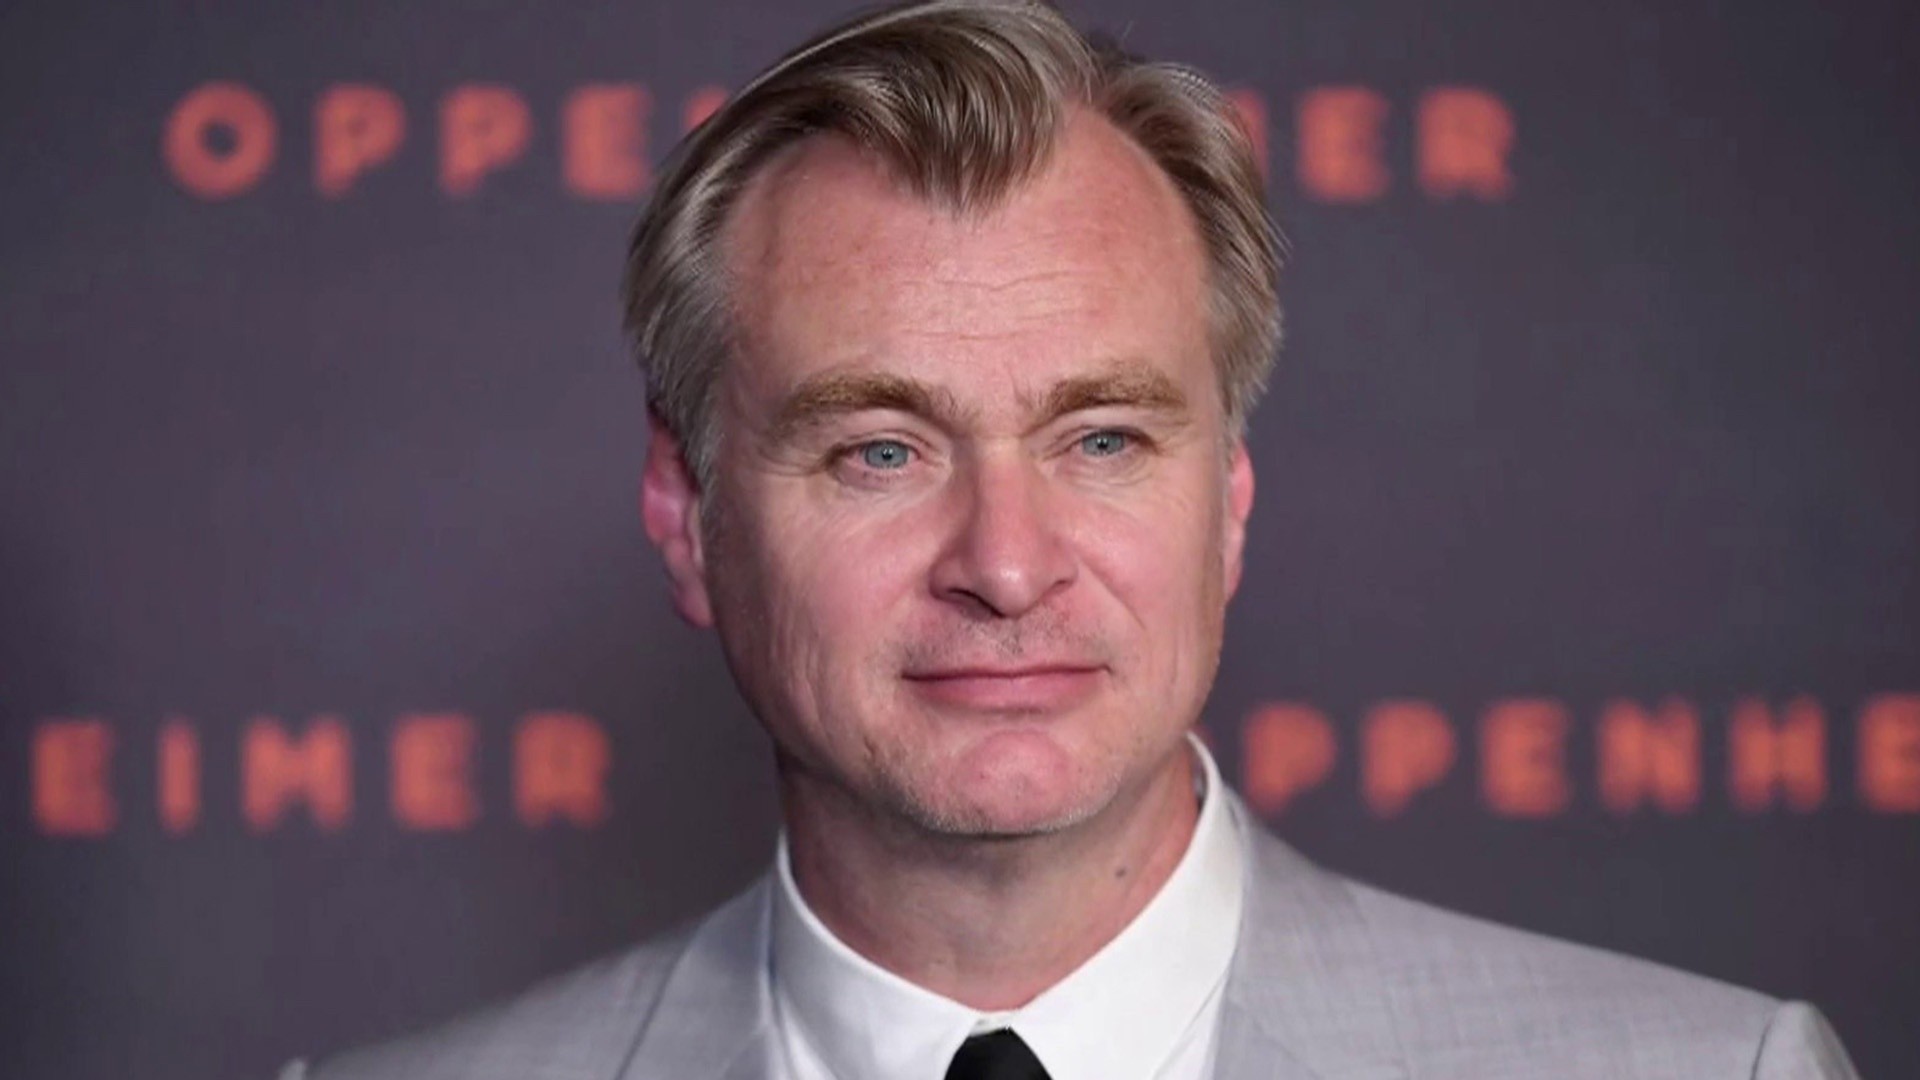 Christopher Nolan learns mid-class Peloton instructor hated 'Tenet'